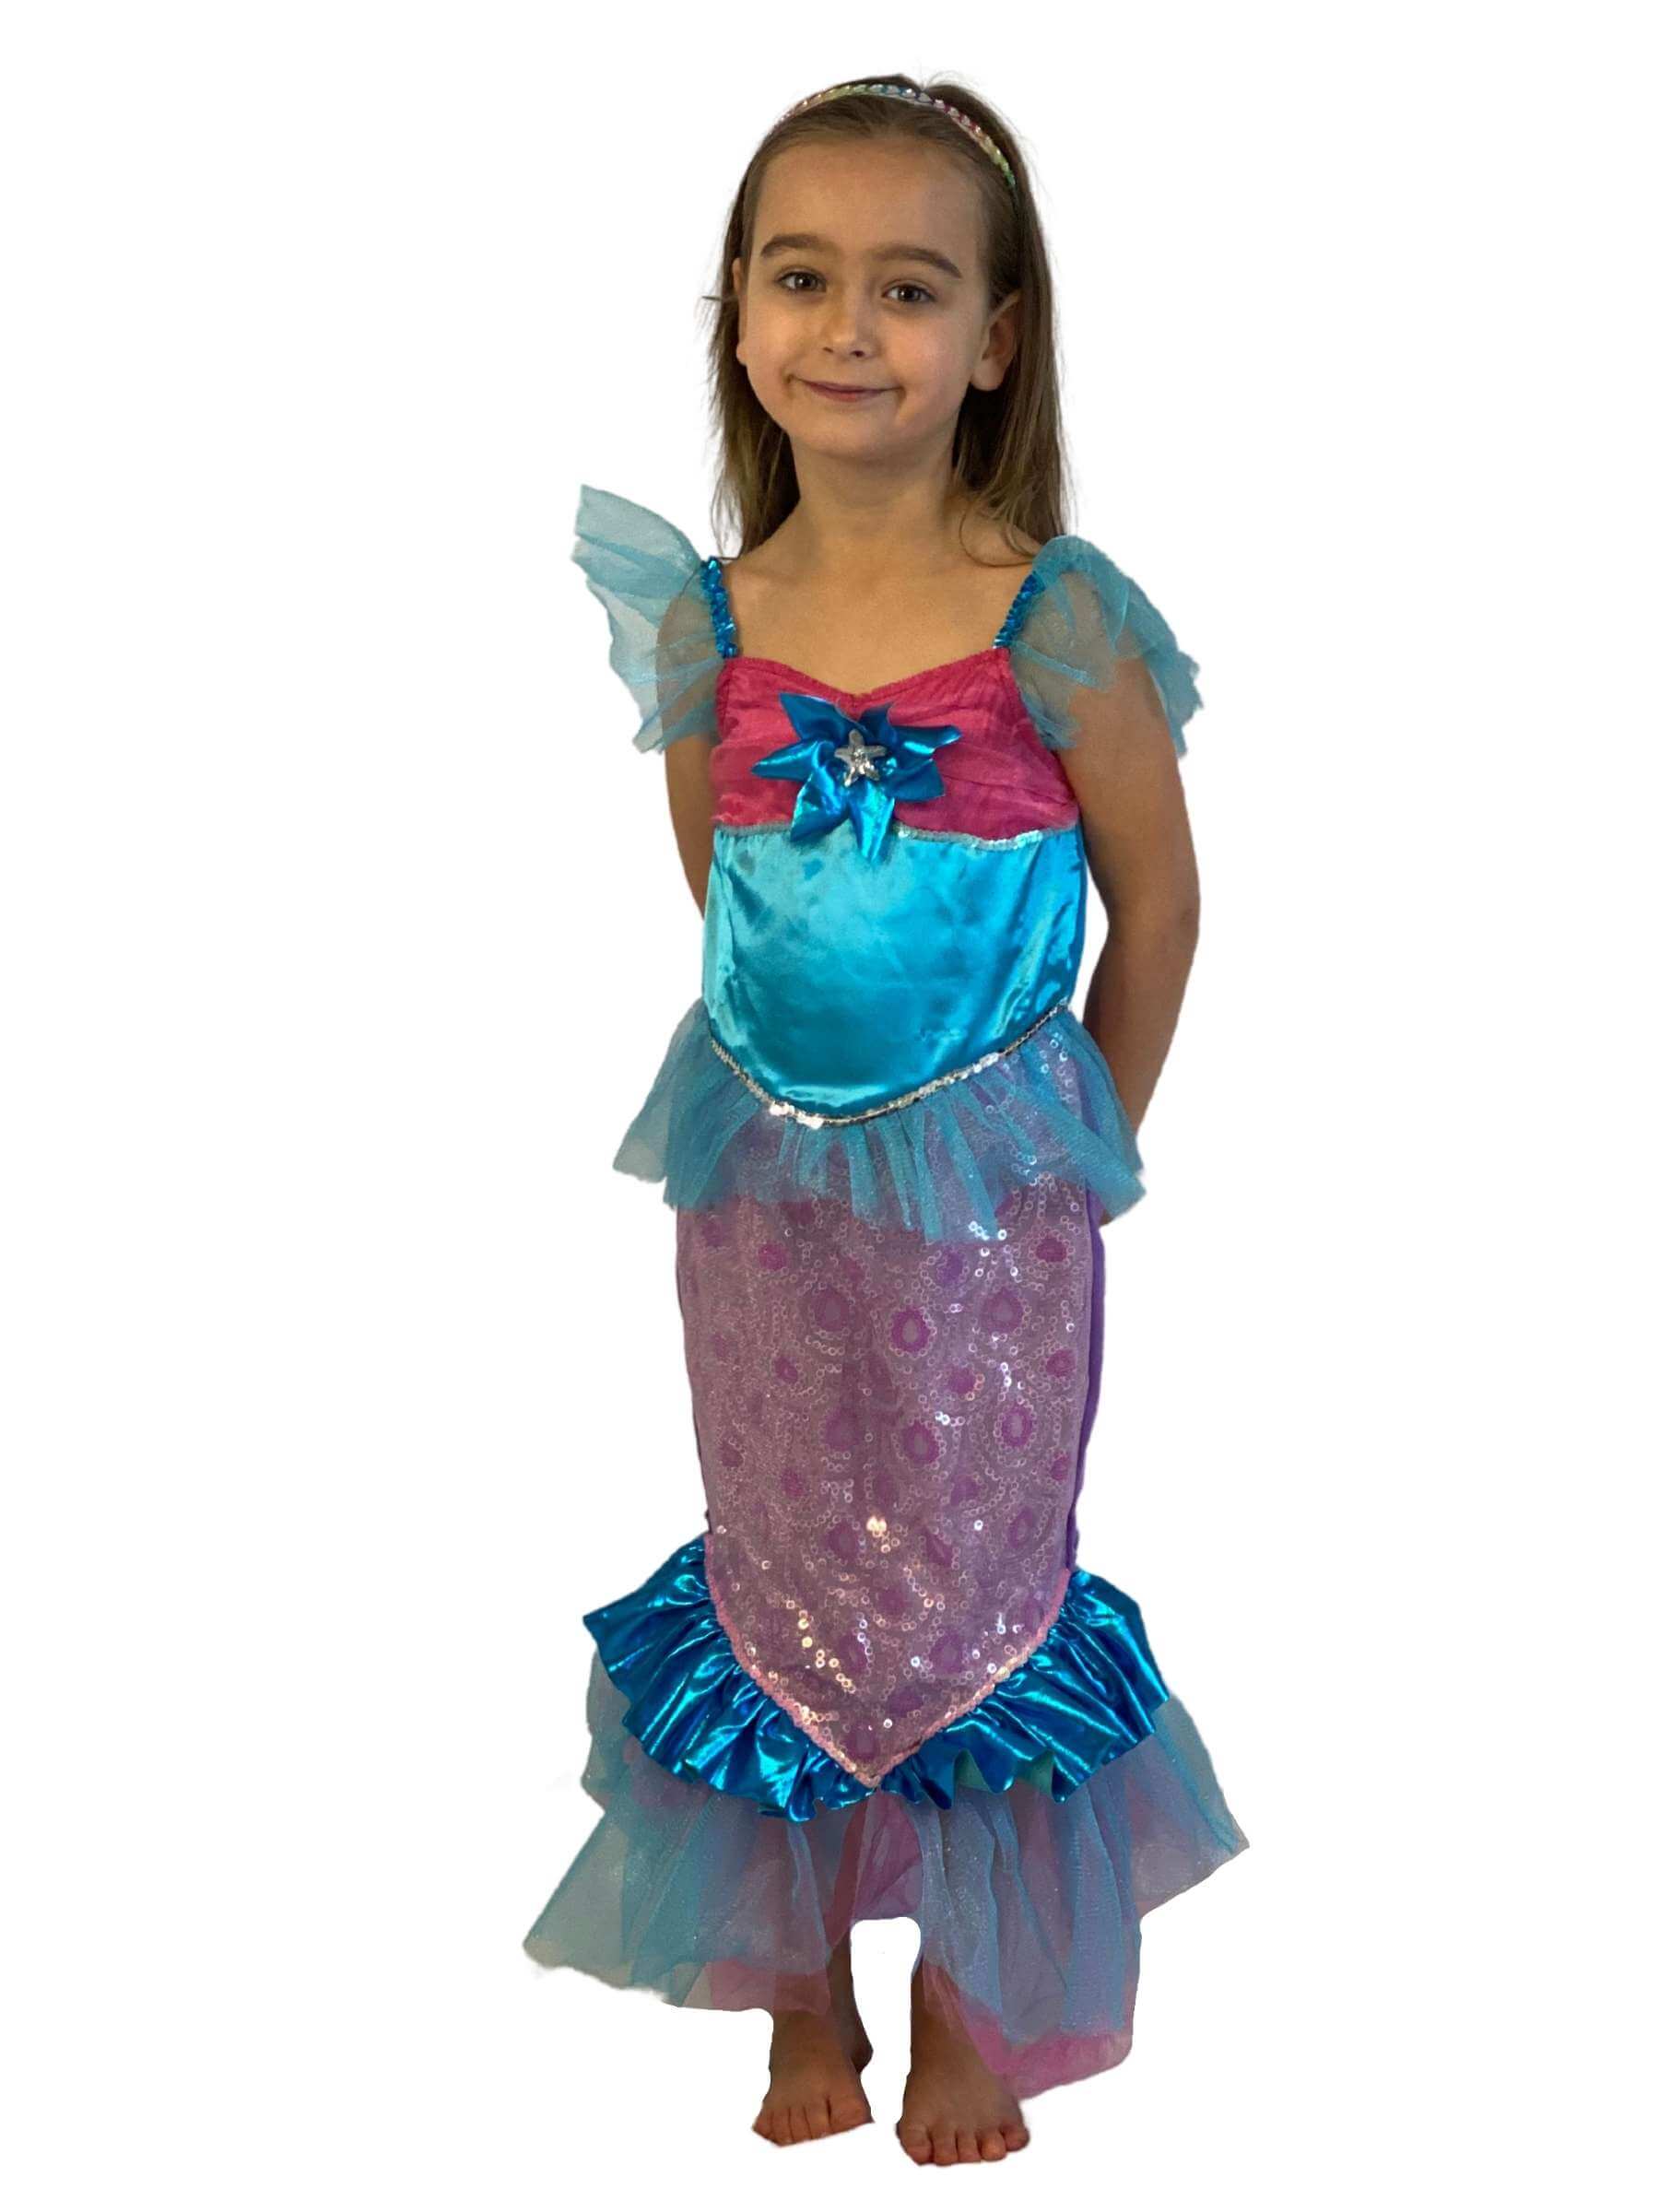 Girl wearing a blue and pink mermaid dress in fishtail style. 